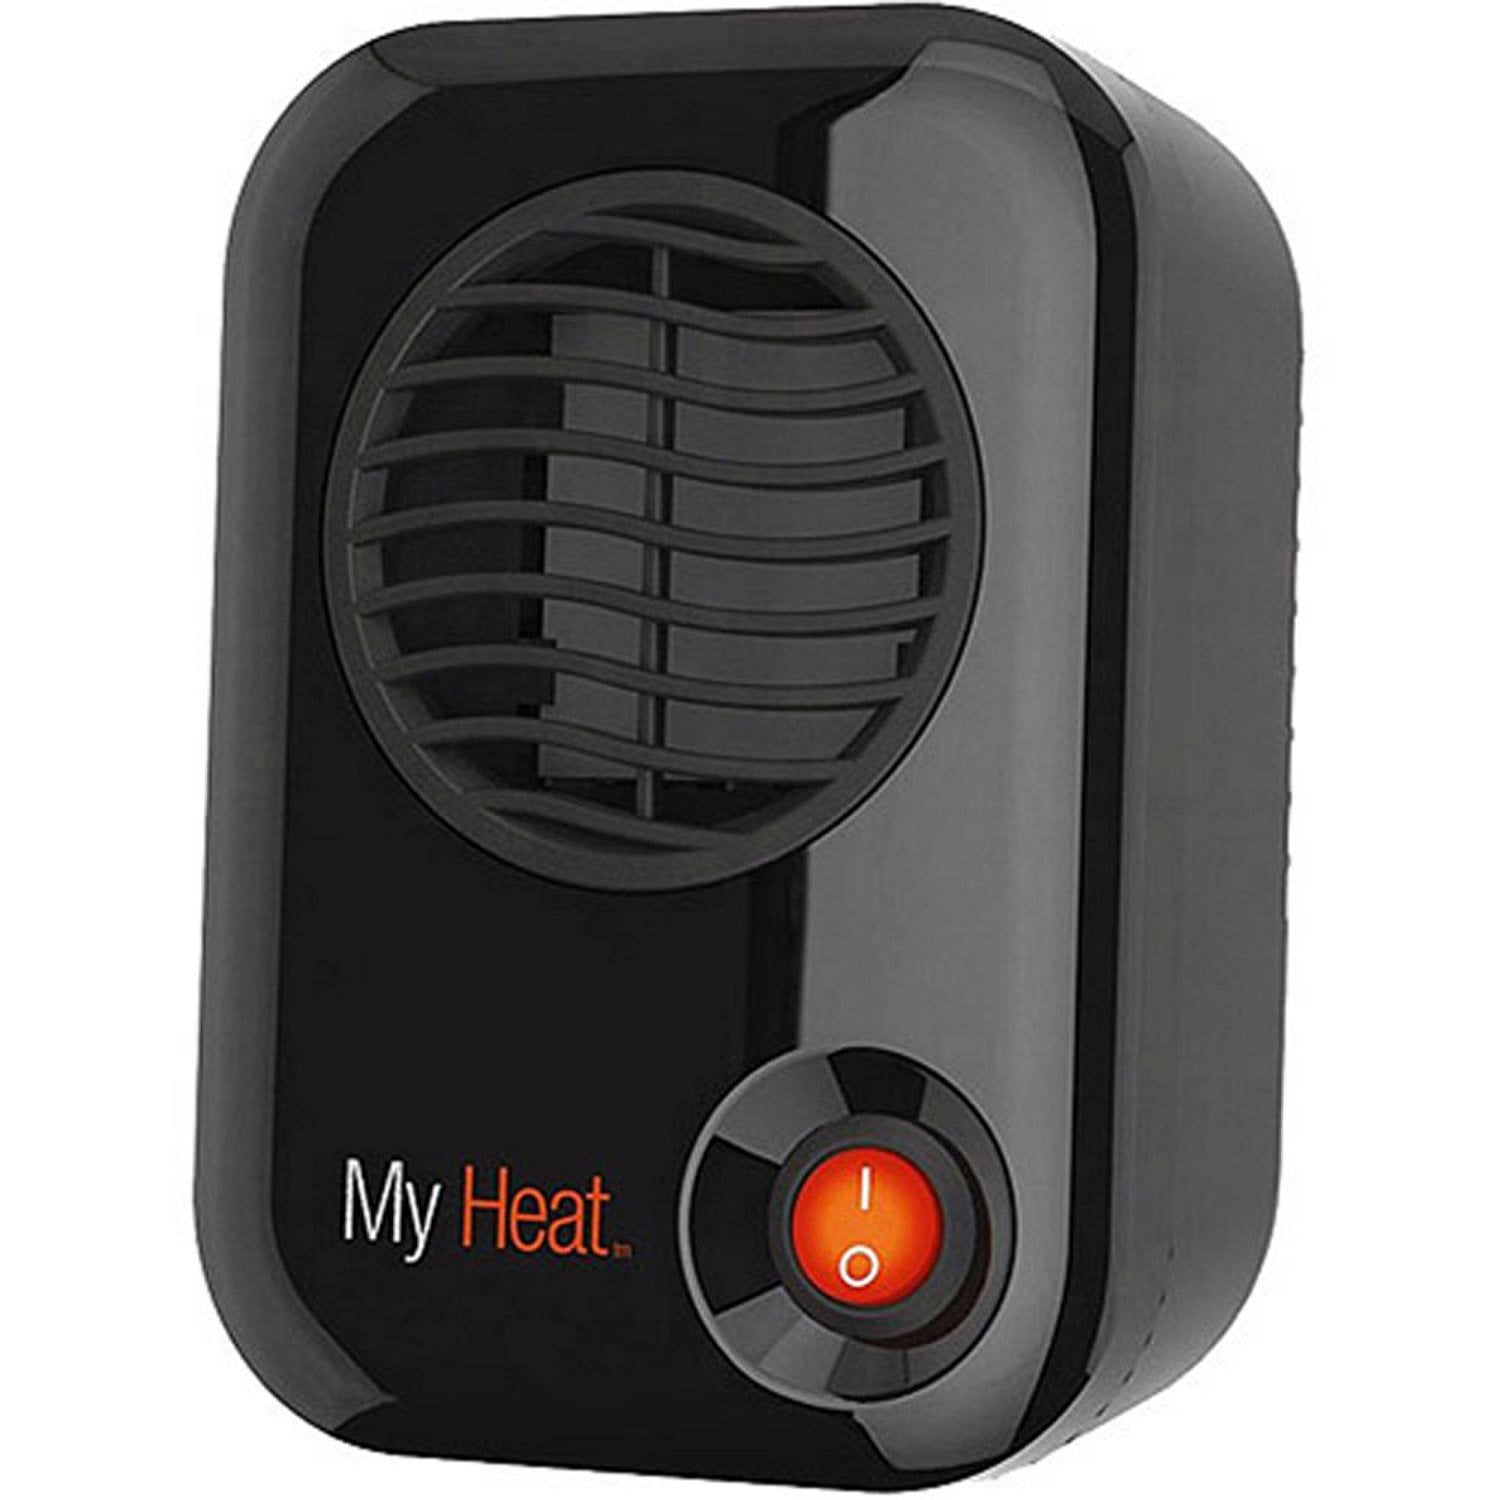 lasko model 100 myheat personal space heater, black - compact ideal for the desk or around the home office - Walmart.com